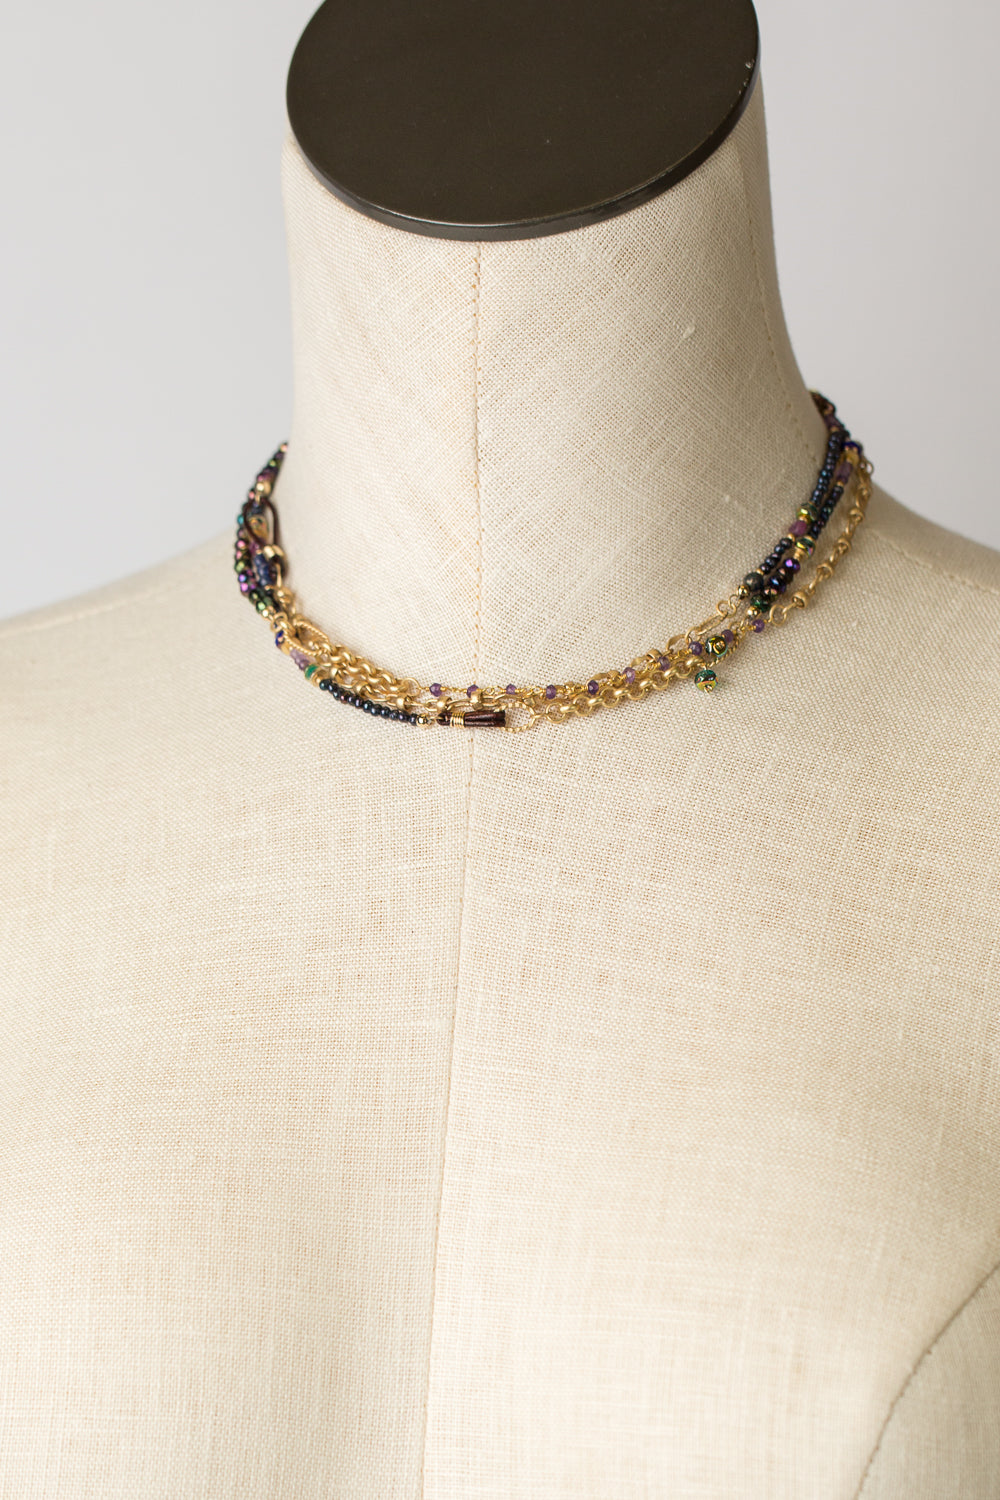 Masquerade 46-48" Amethyst, Pyrite, Fresh Water Pearl Collage Necklace